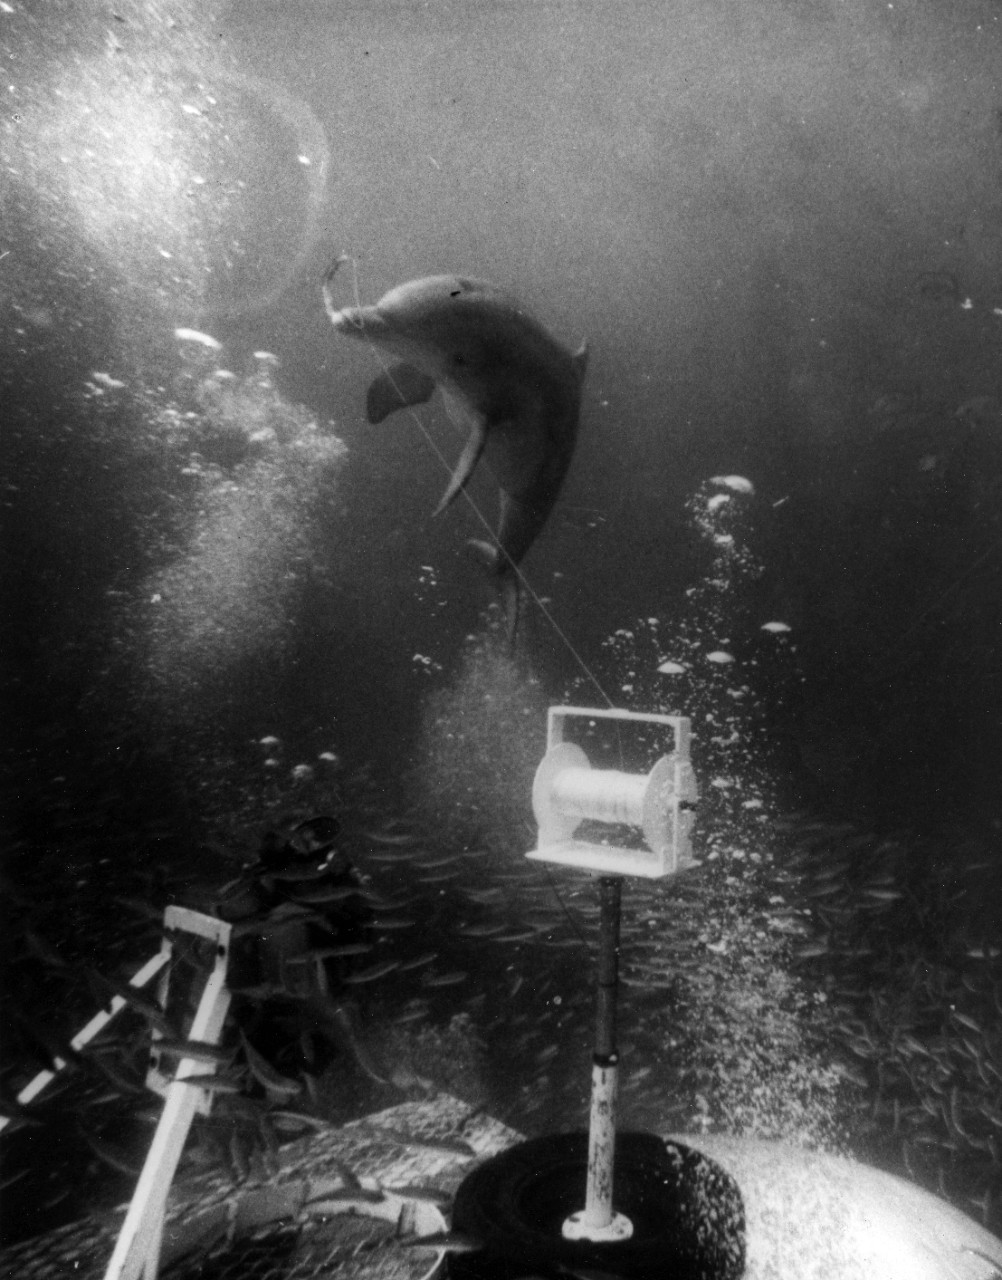 Working with man...porpoises taking line from experimental diver rescue reel. This work was directed toward development of diver rescue system for Man in the Sea program. September 1968. 